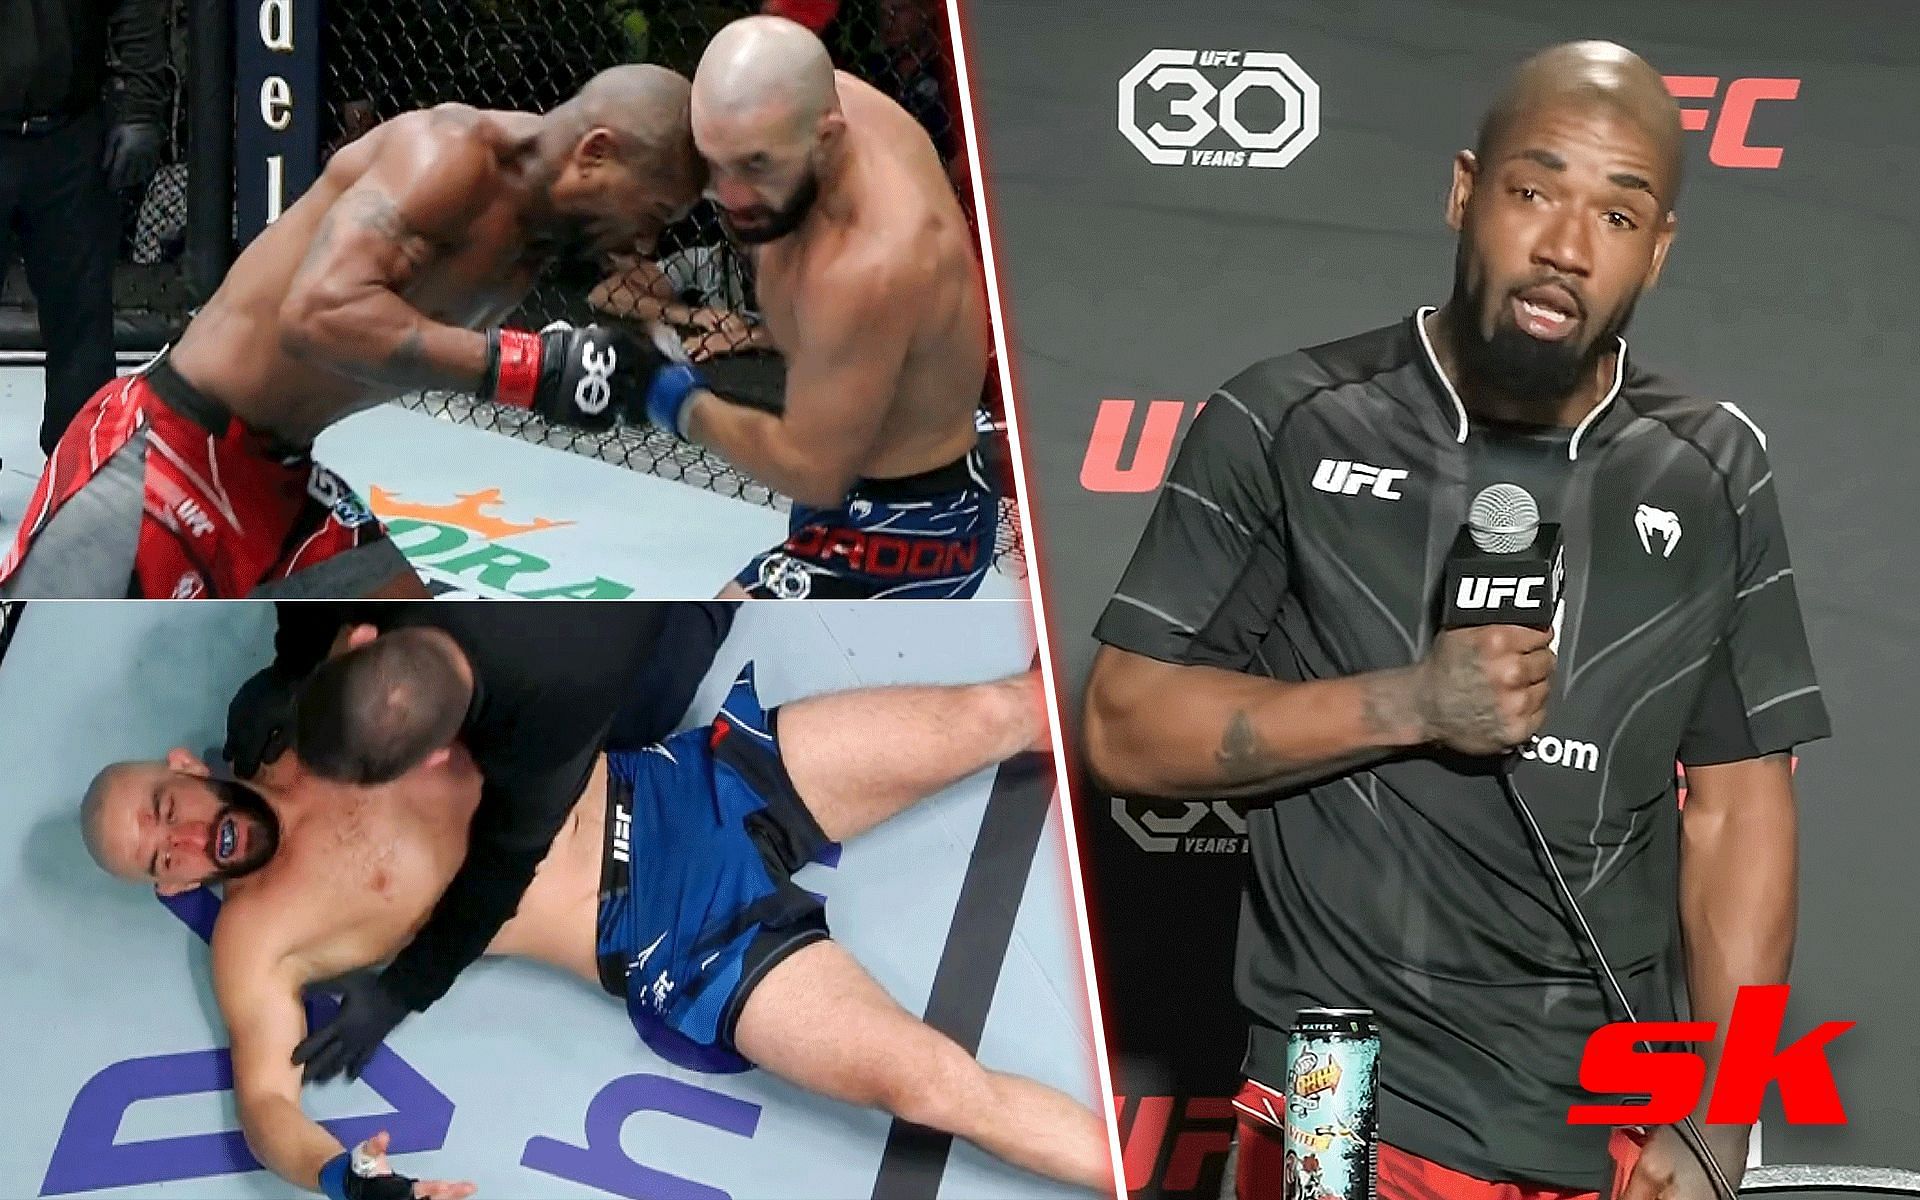 Bobby Green vs. Jared Gordon. [Images courtesy: left images from Twitter @MMAJunkie and right image from YouTube MMA Junkie]